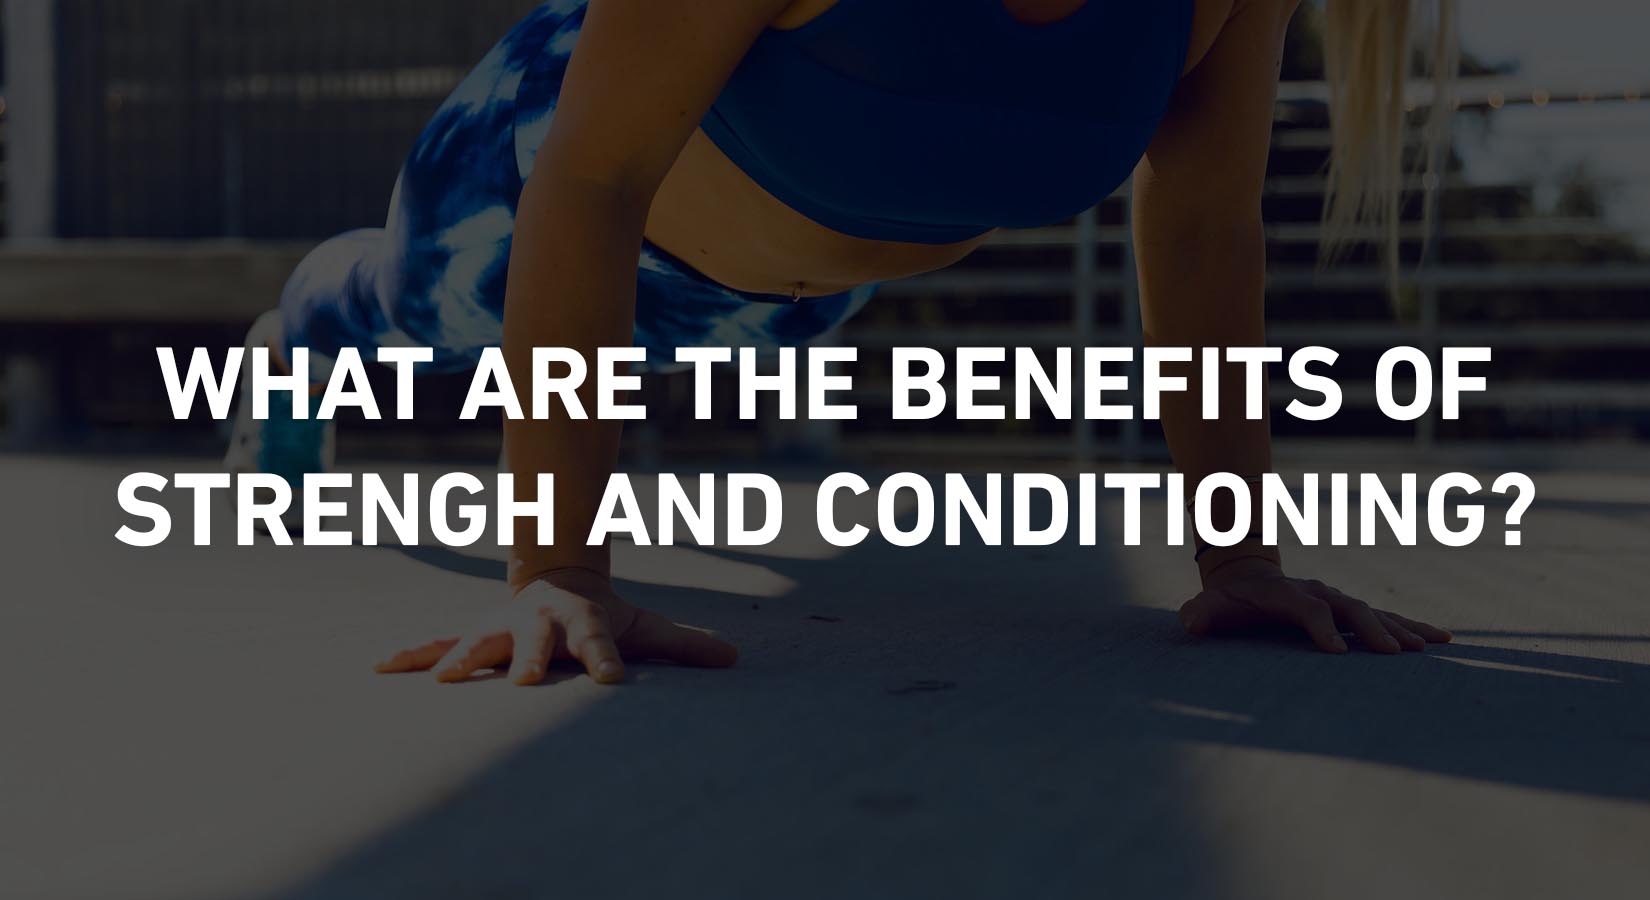 Benefits of Strength & Conditioning for Runners